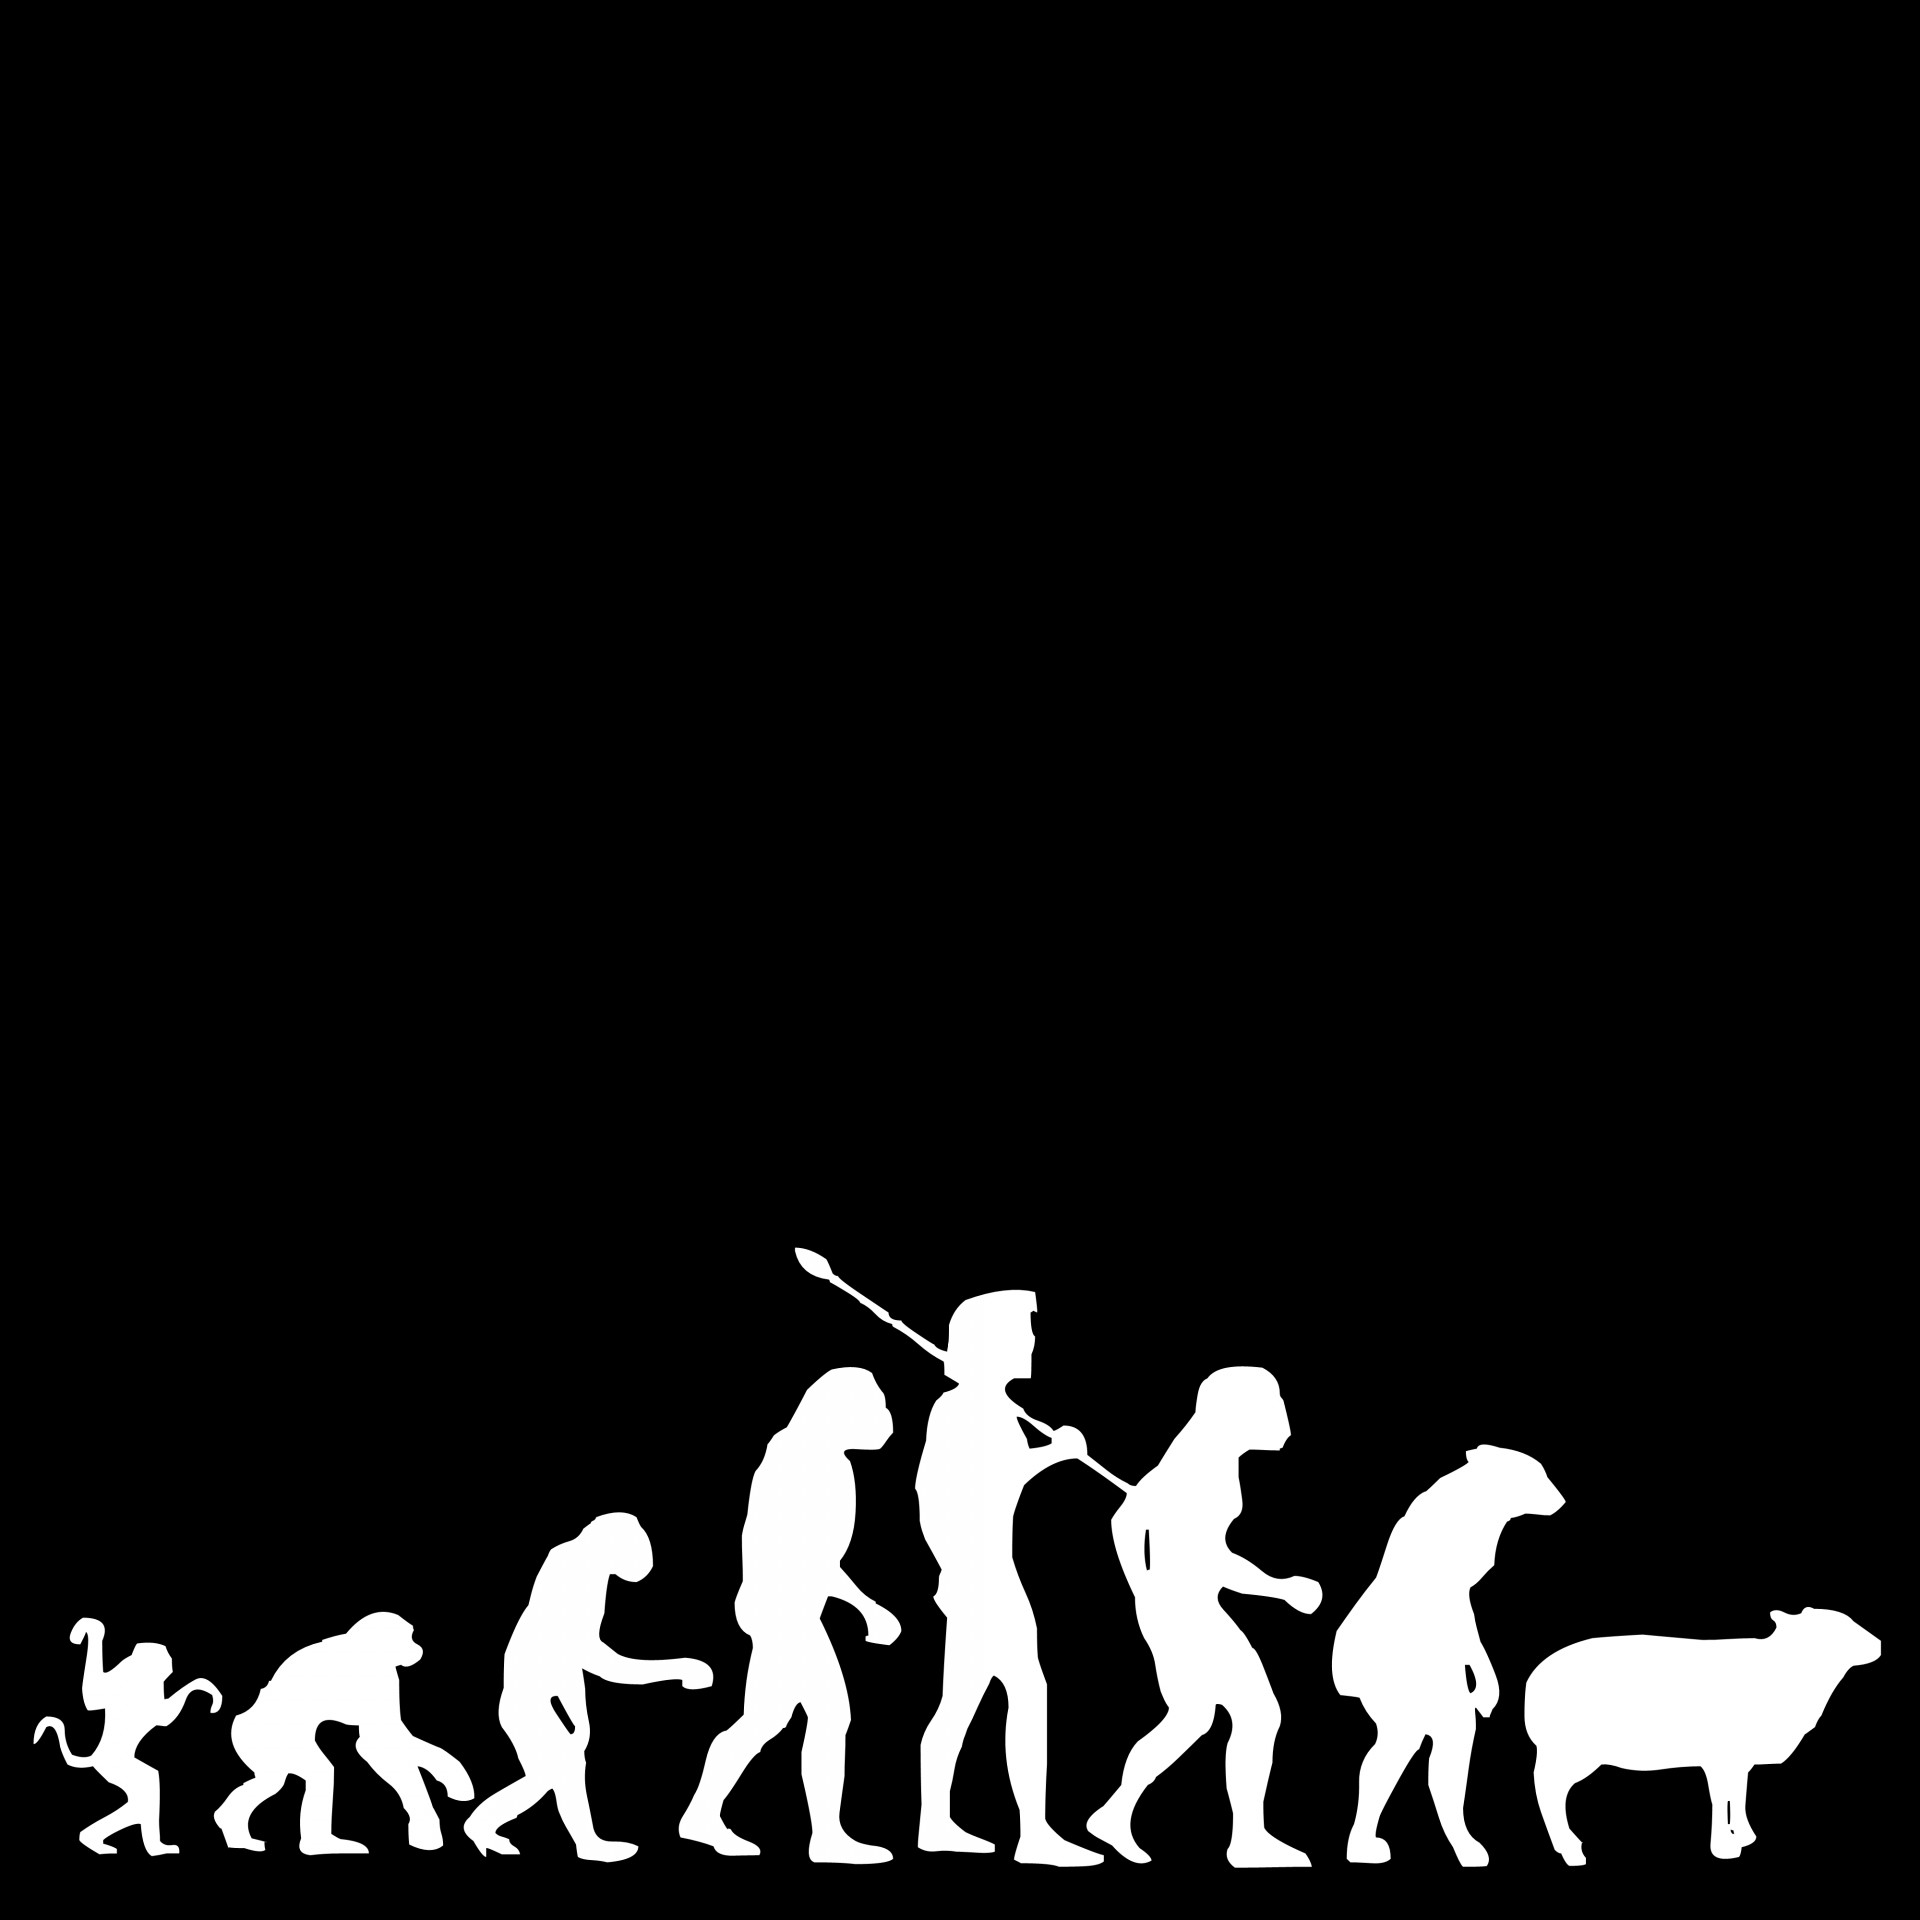 drawing of darwin evolution white figures on black background